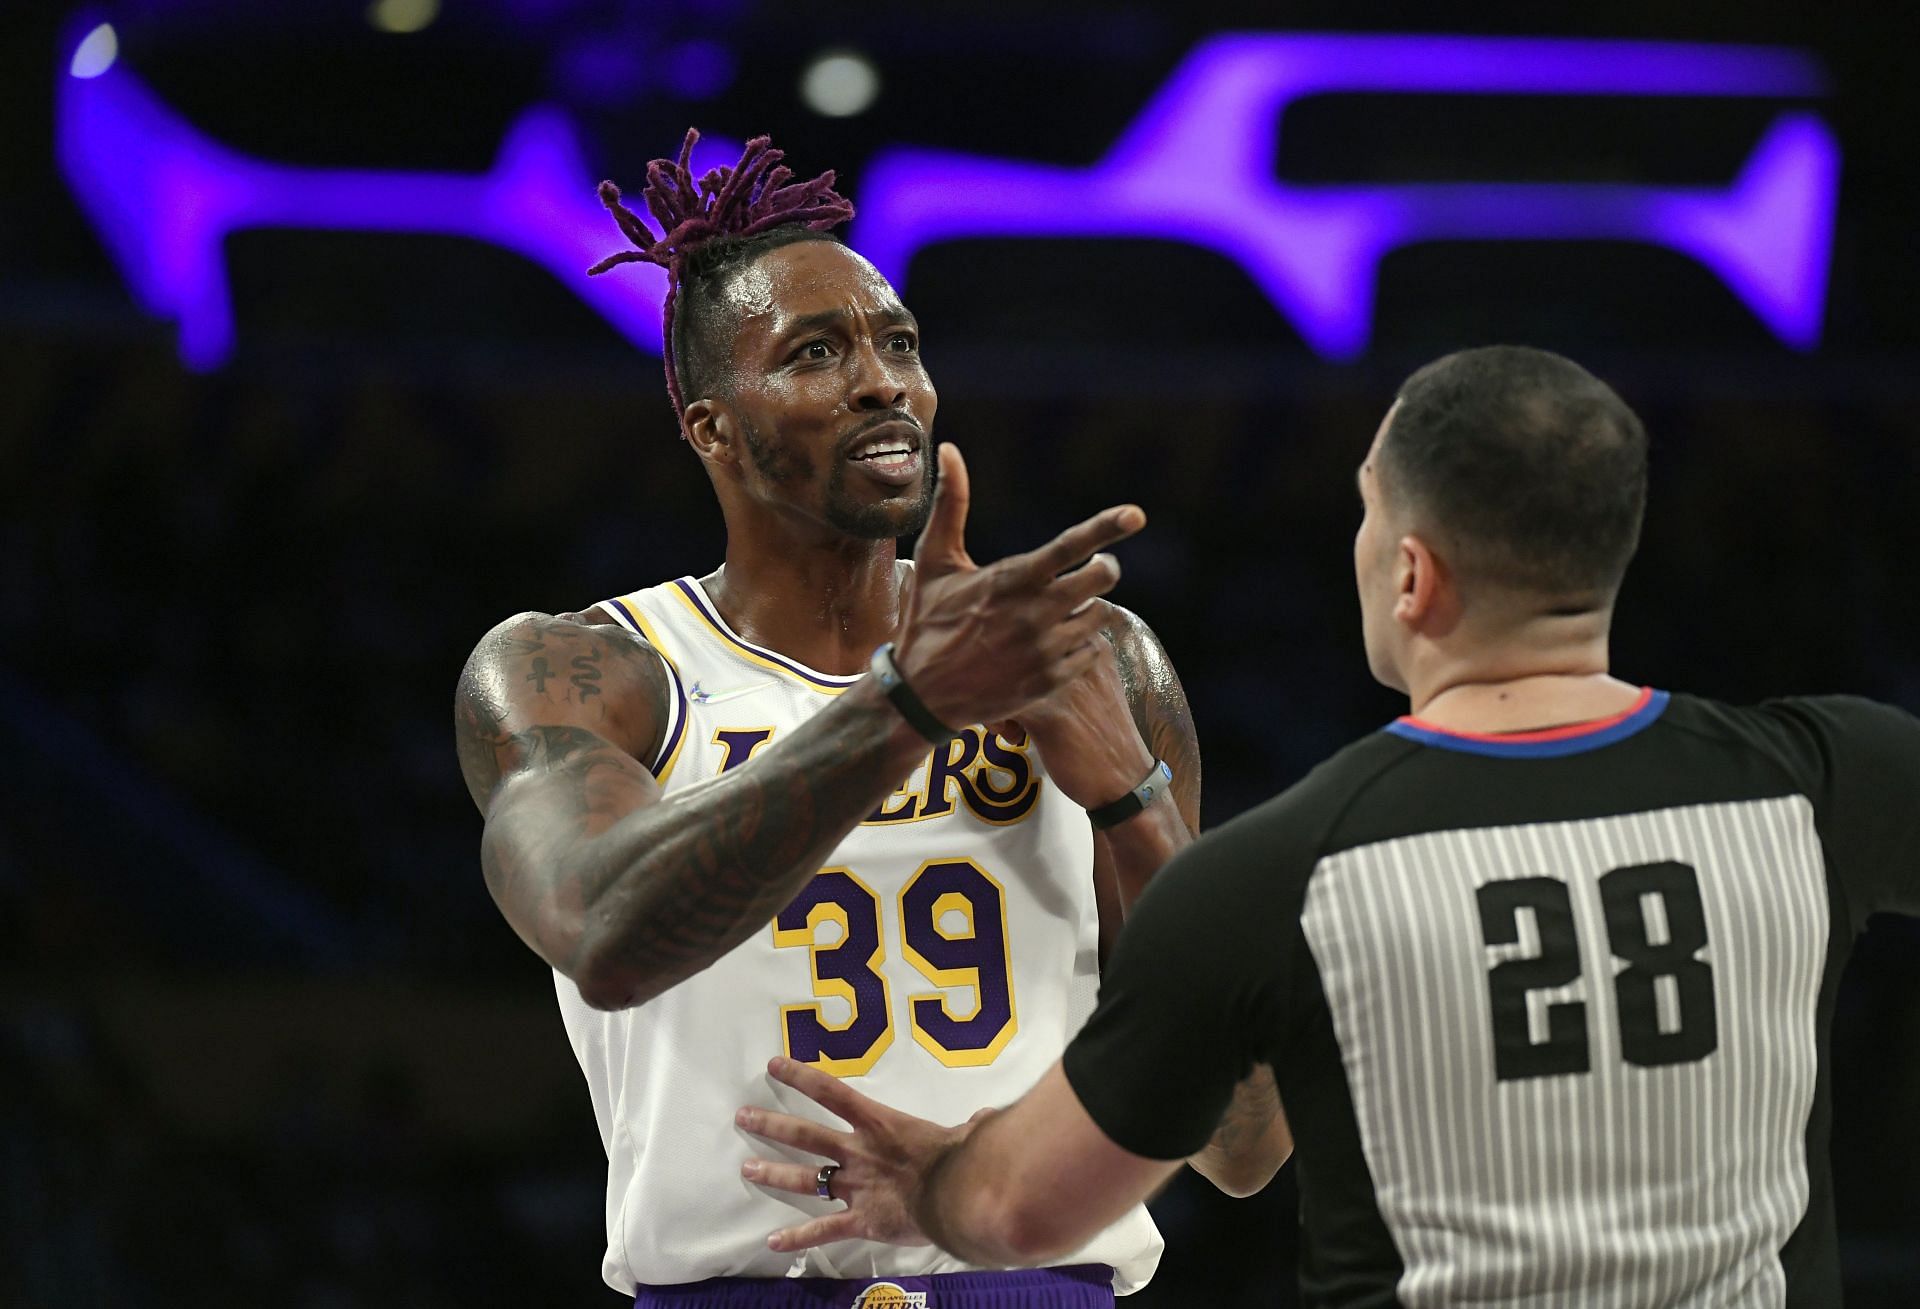 Dwight Howard argues a call at the Brooklyn Nets vs LA Lakers game